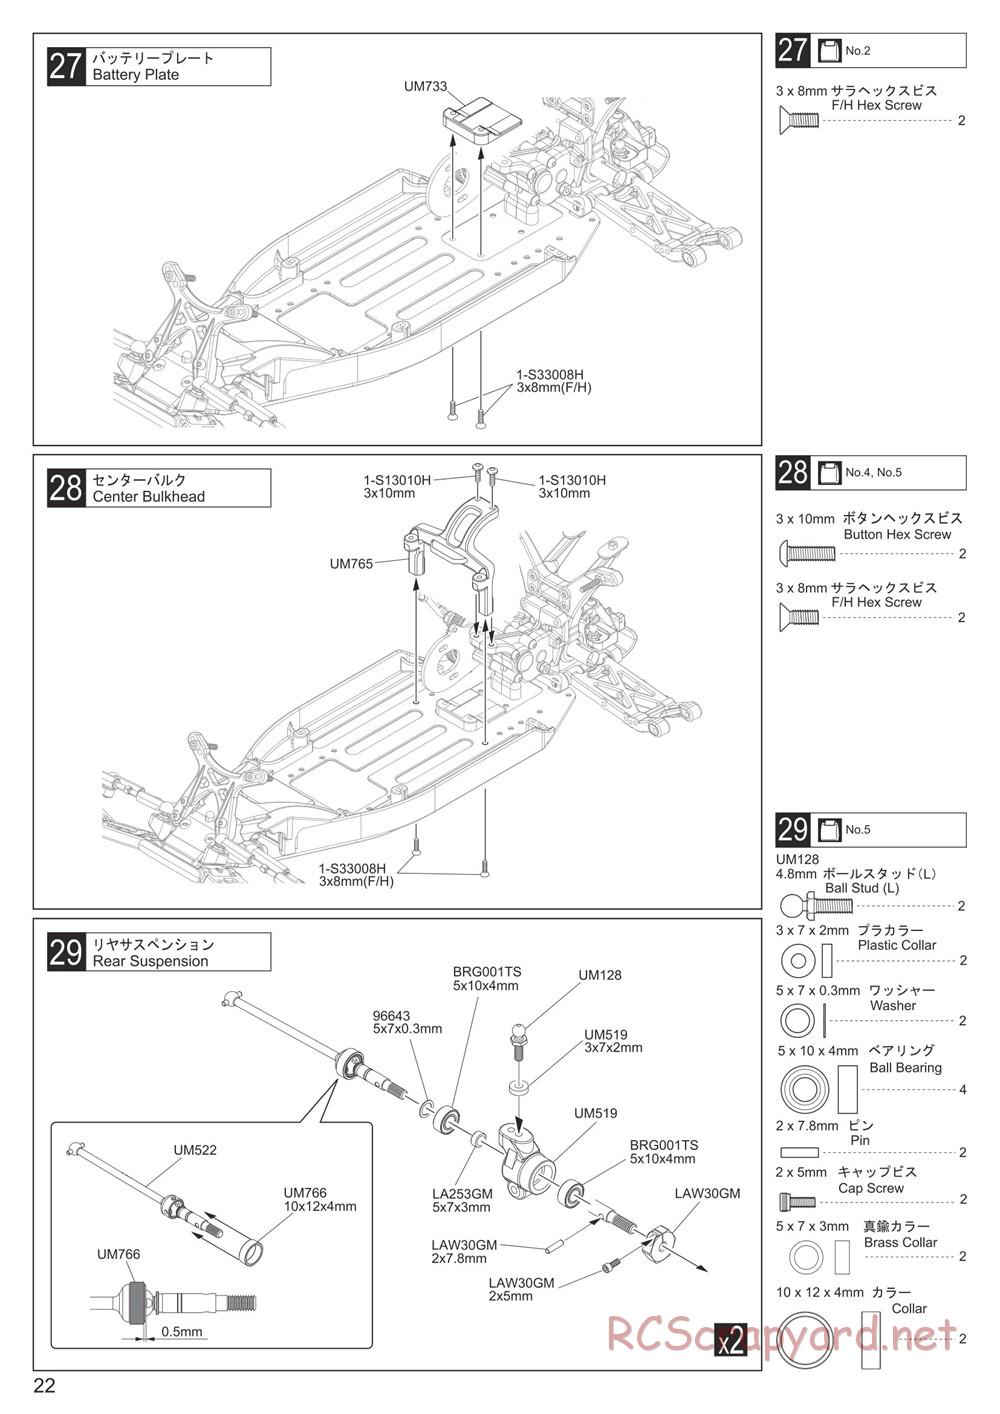 Kyosho - Ultima RB7 - Manual - Page 22